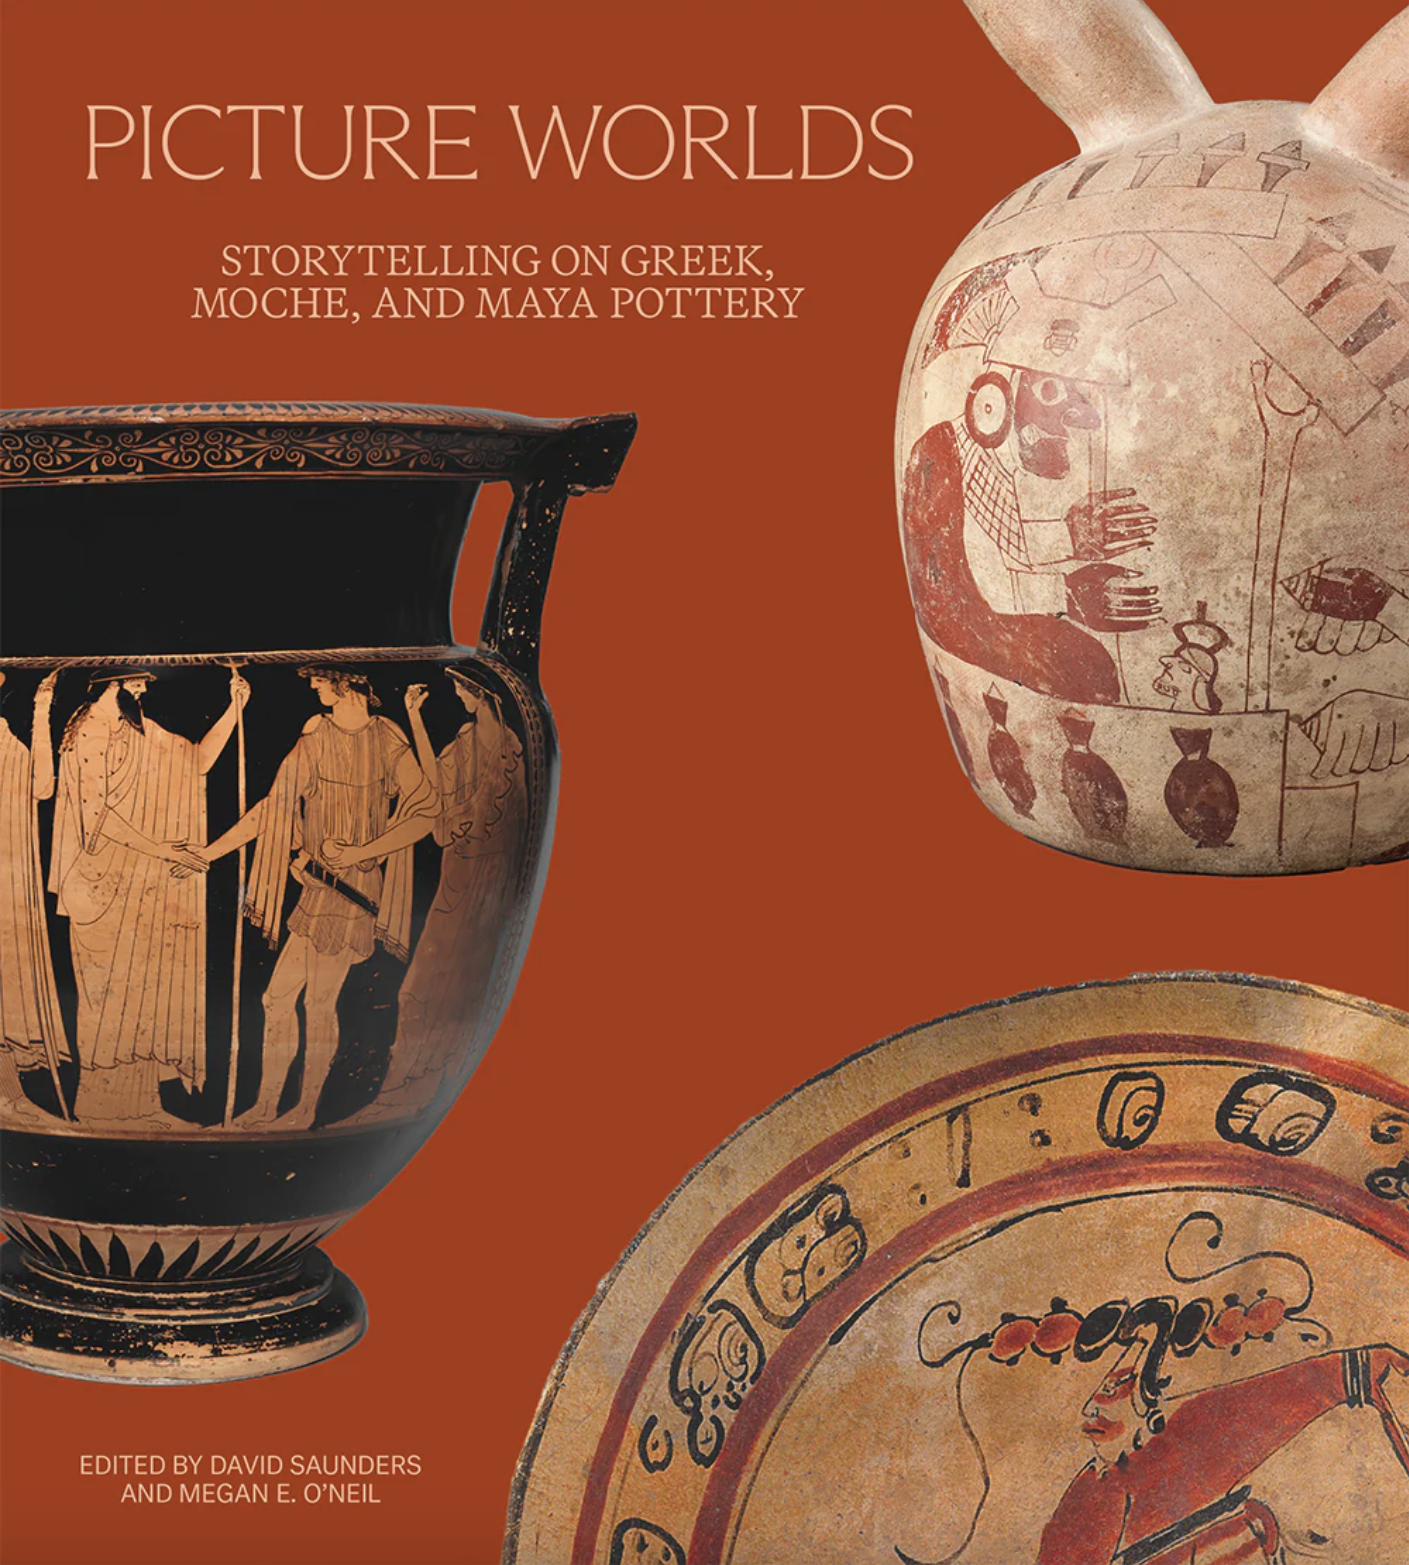 Picture Worlds catalogue cover featuring three details of ceramic objects on a red cover